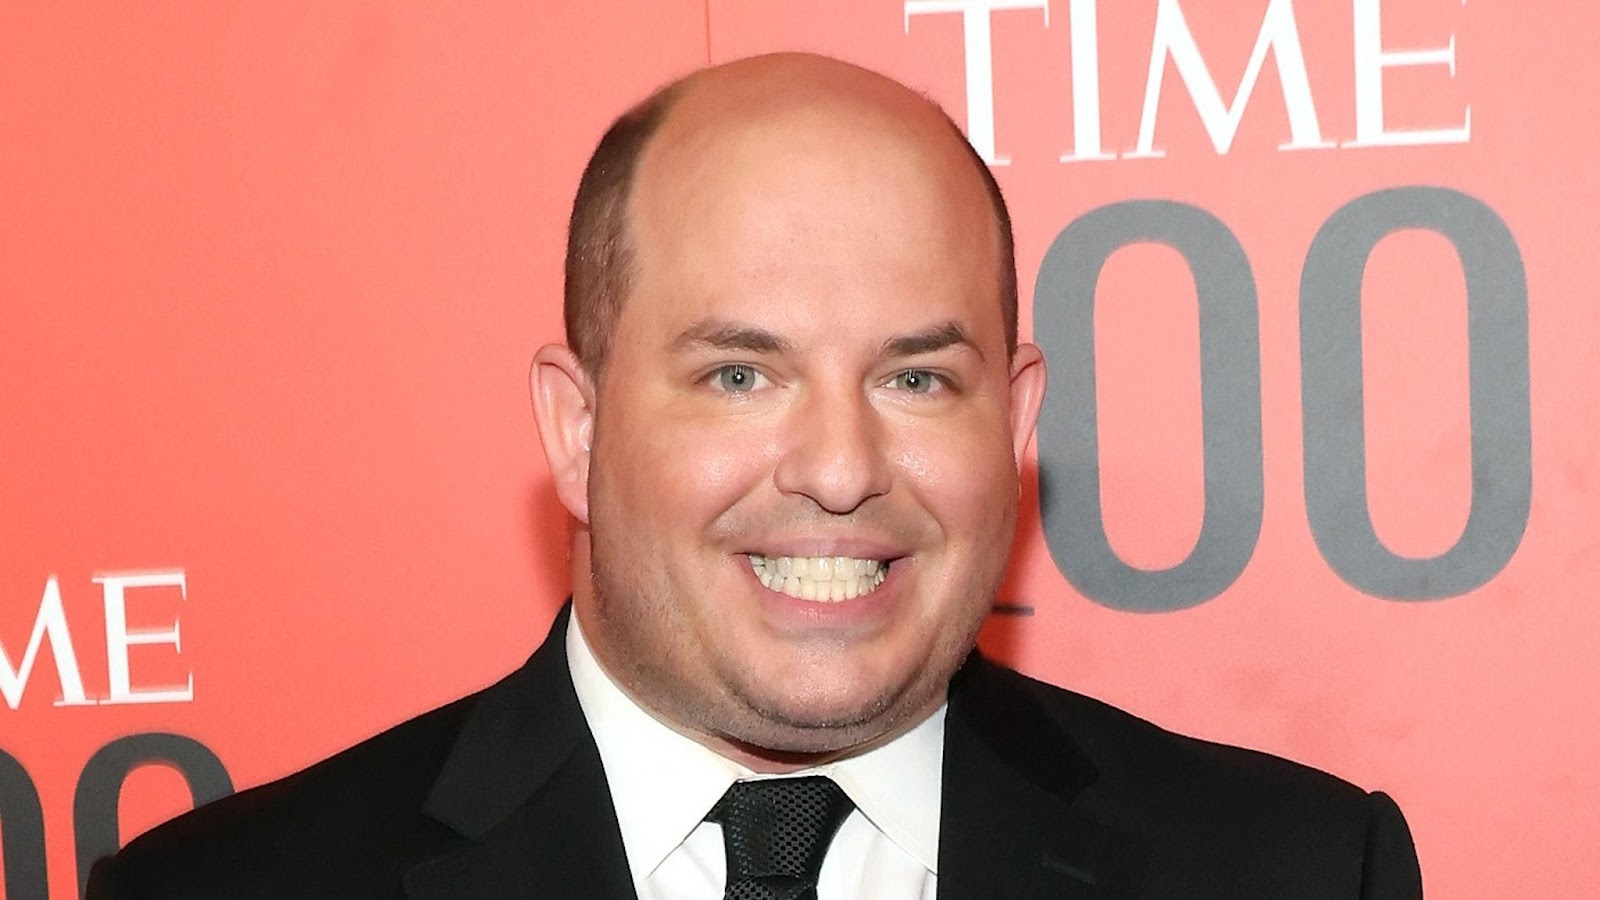 NEW YORK, NEW YORK - JUNE 08: Brian Stelter attends the 2022 Time 100 Gala at Frederick P. Rose Hall, Jazz at Lincoln Center on June 08, 2022 in New York City.